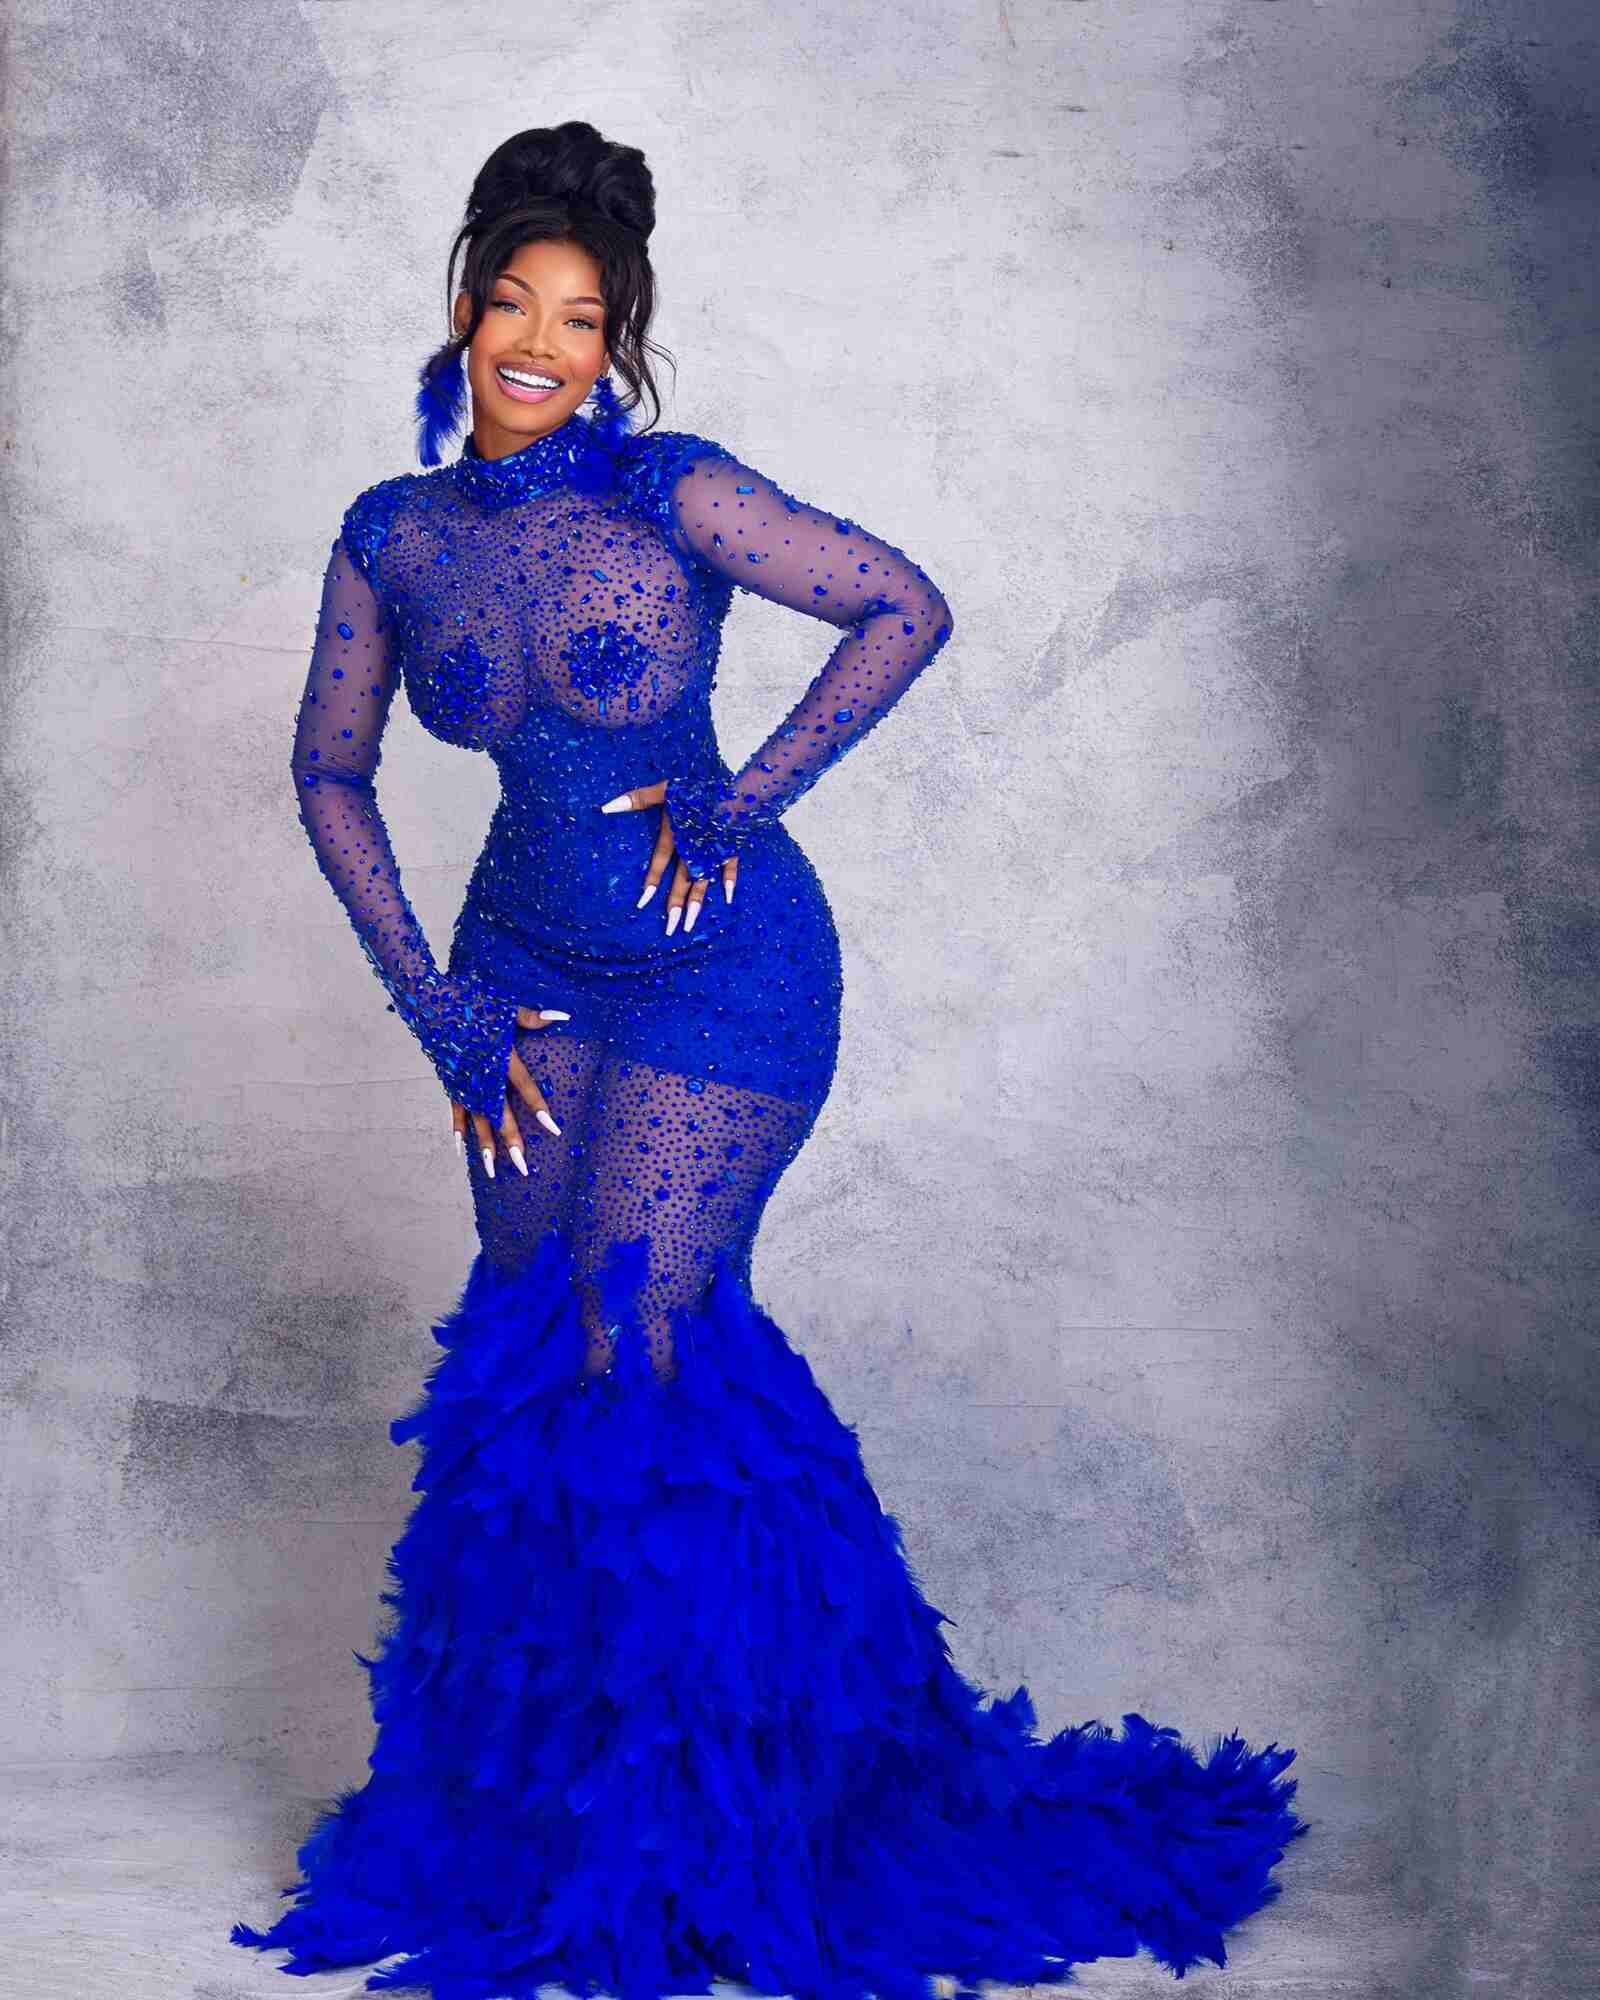 Tacha reveals that her AMVCA dress cost a whopping $20,000